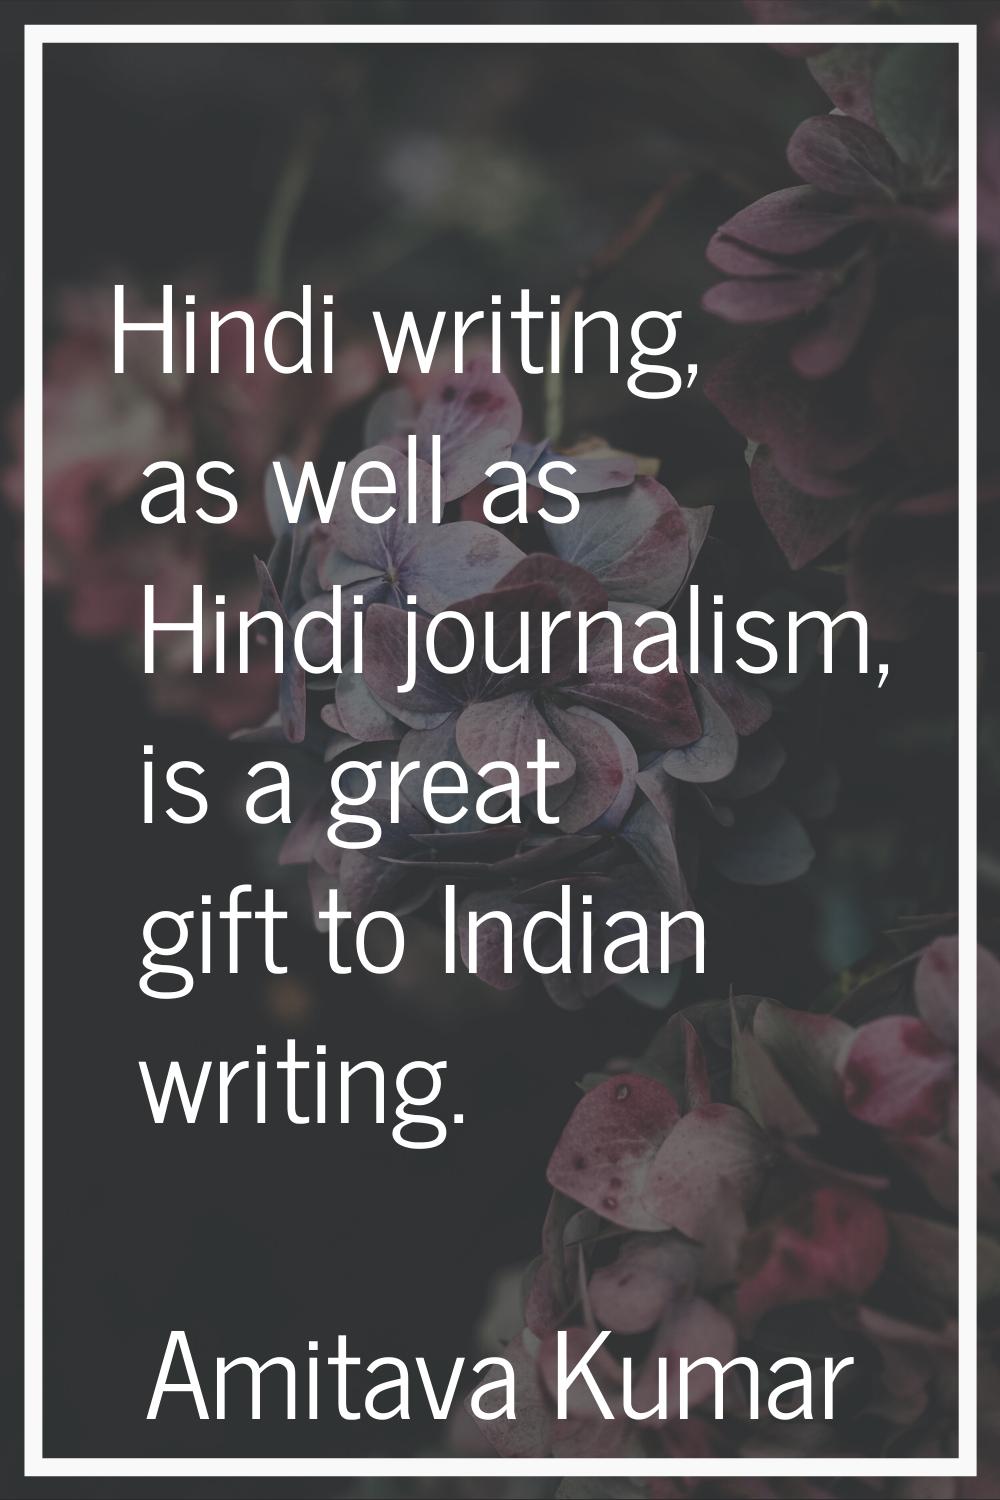 Hindi writing, as well as Hindi journalism, is a great gift to Indian writing.